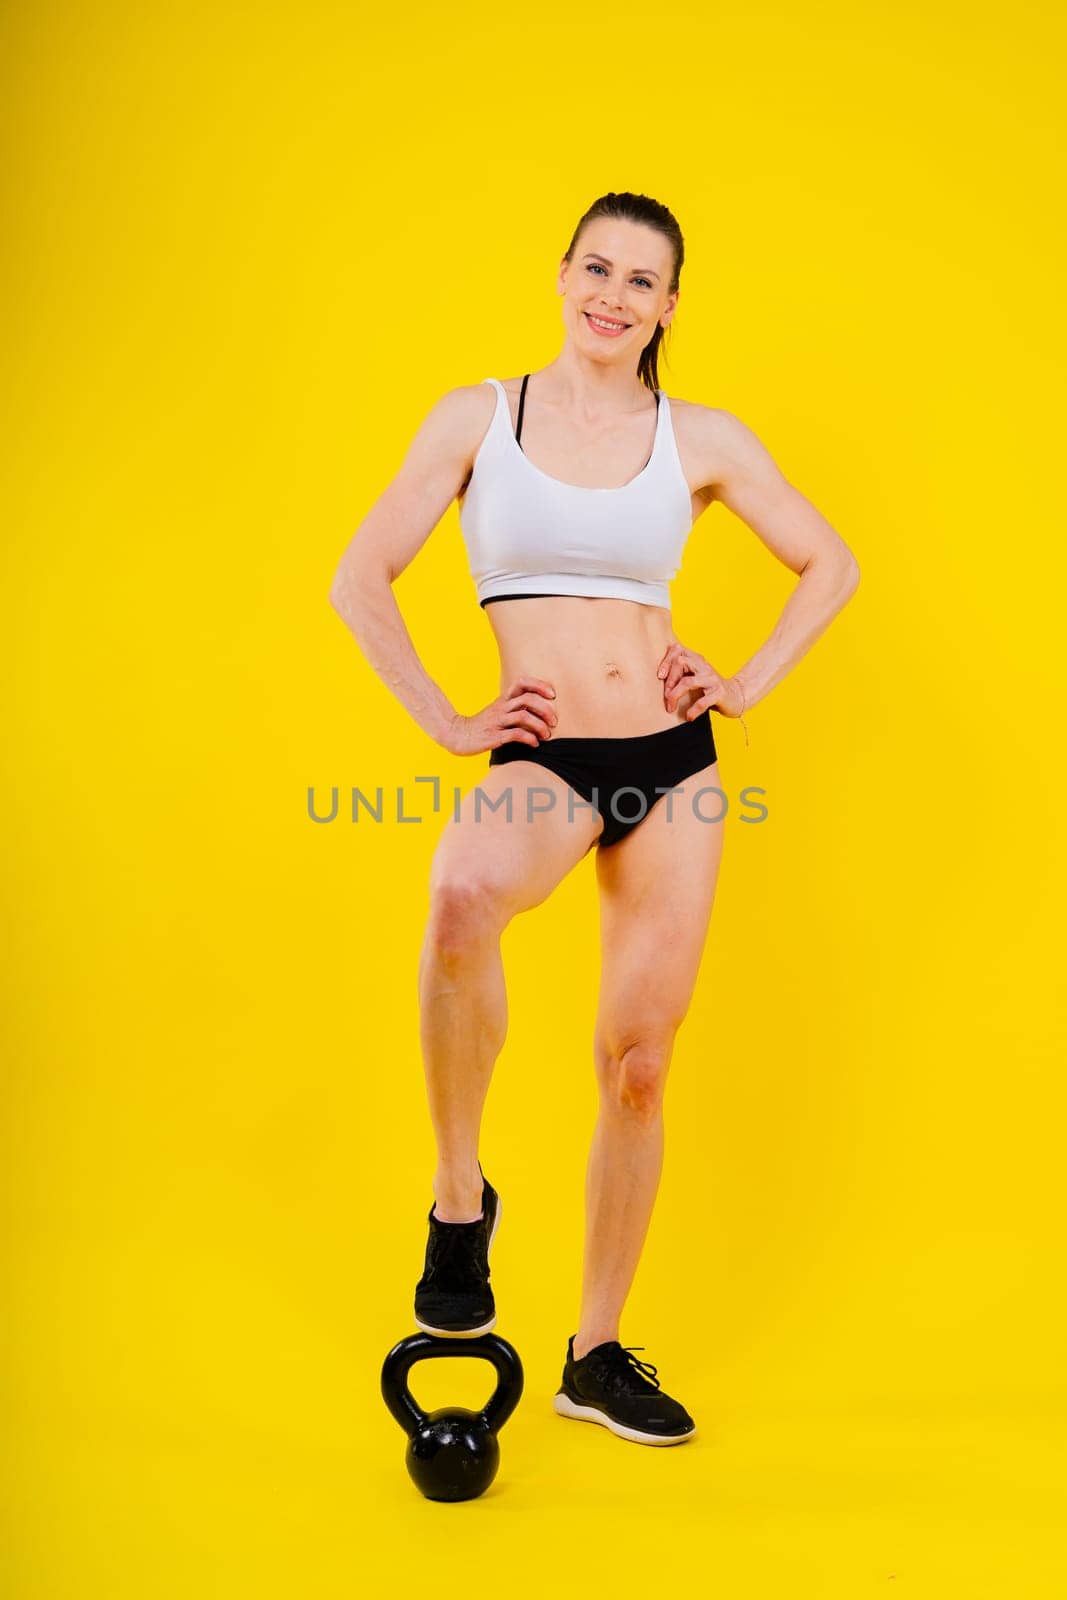 Sport, active lifestyle concept. Smiling strong and slim fitness female athlete holding kettlebells